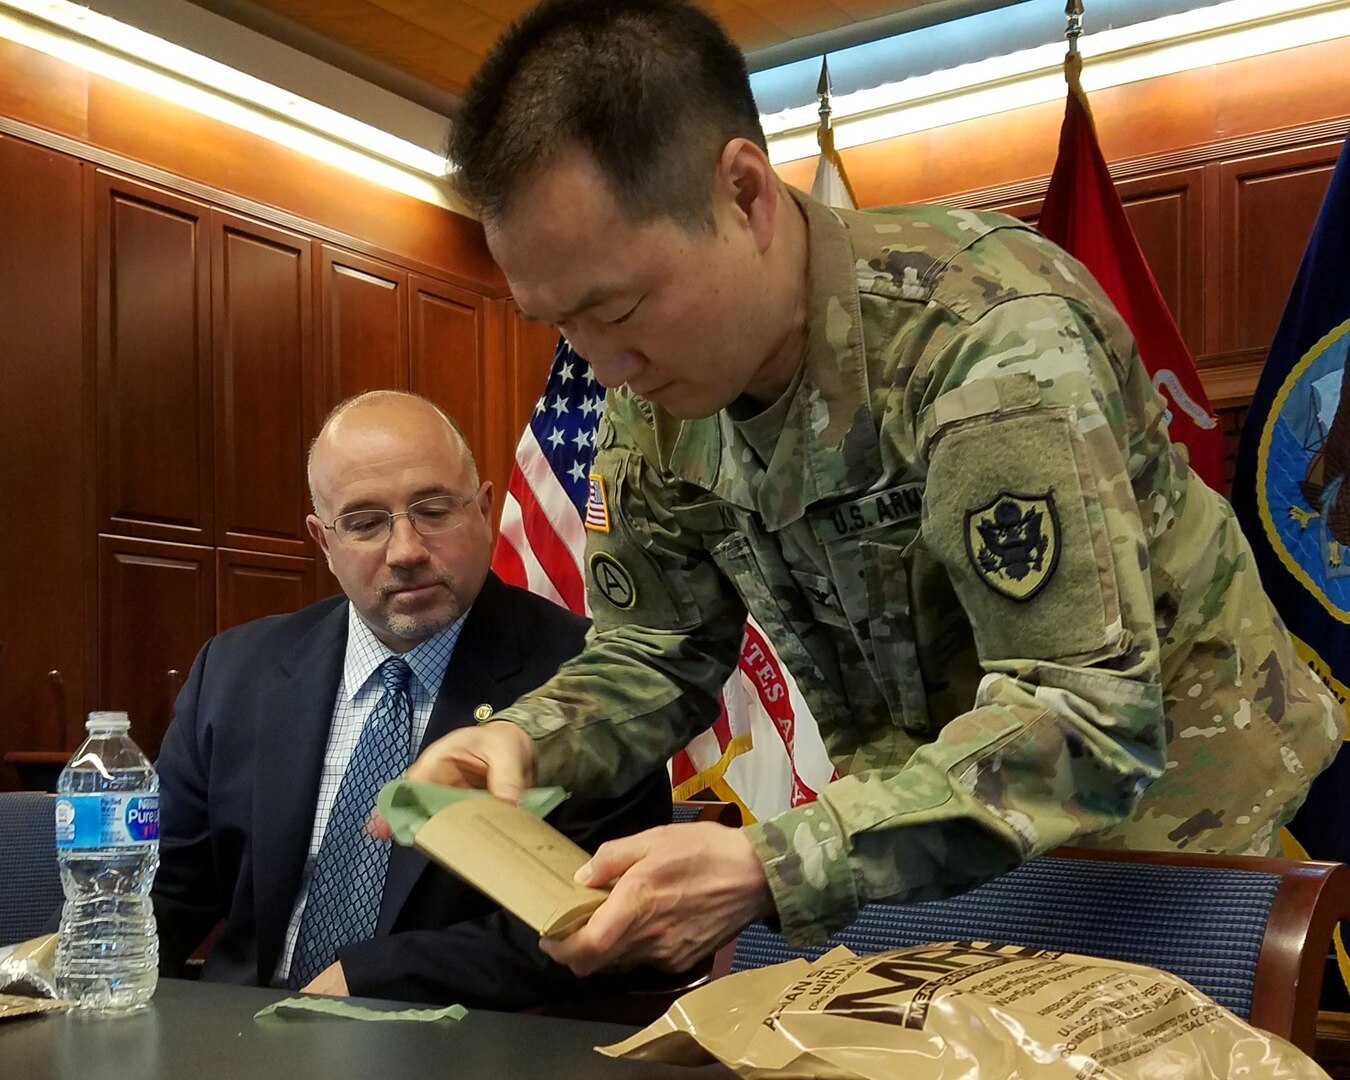 Army Col. Brian Kim, senior veterinary advisor, demonstrates the heater in a “meal, ready to eat” field ration for Mike Scott, deputy director of DLA Logistics Operations, at a lunch-and-learn event at DLA headquarters April 4. Scott hosted team members who learned about combat rations, tried current menus and taste-tested potential future products. Photo by Jacob Boyer